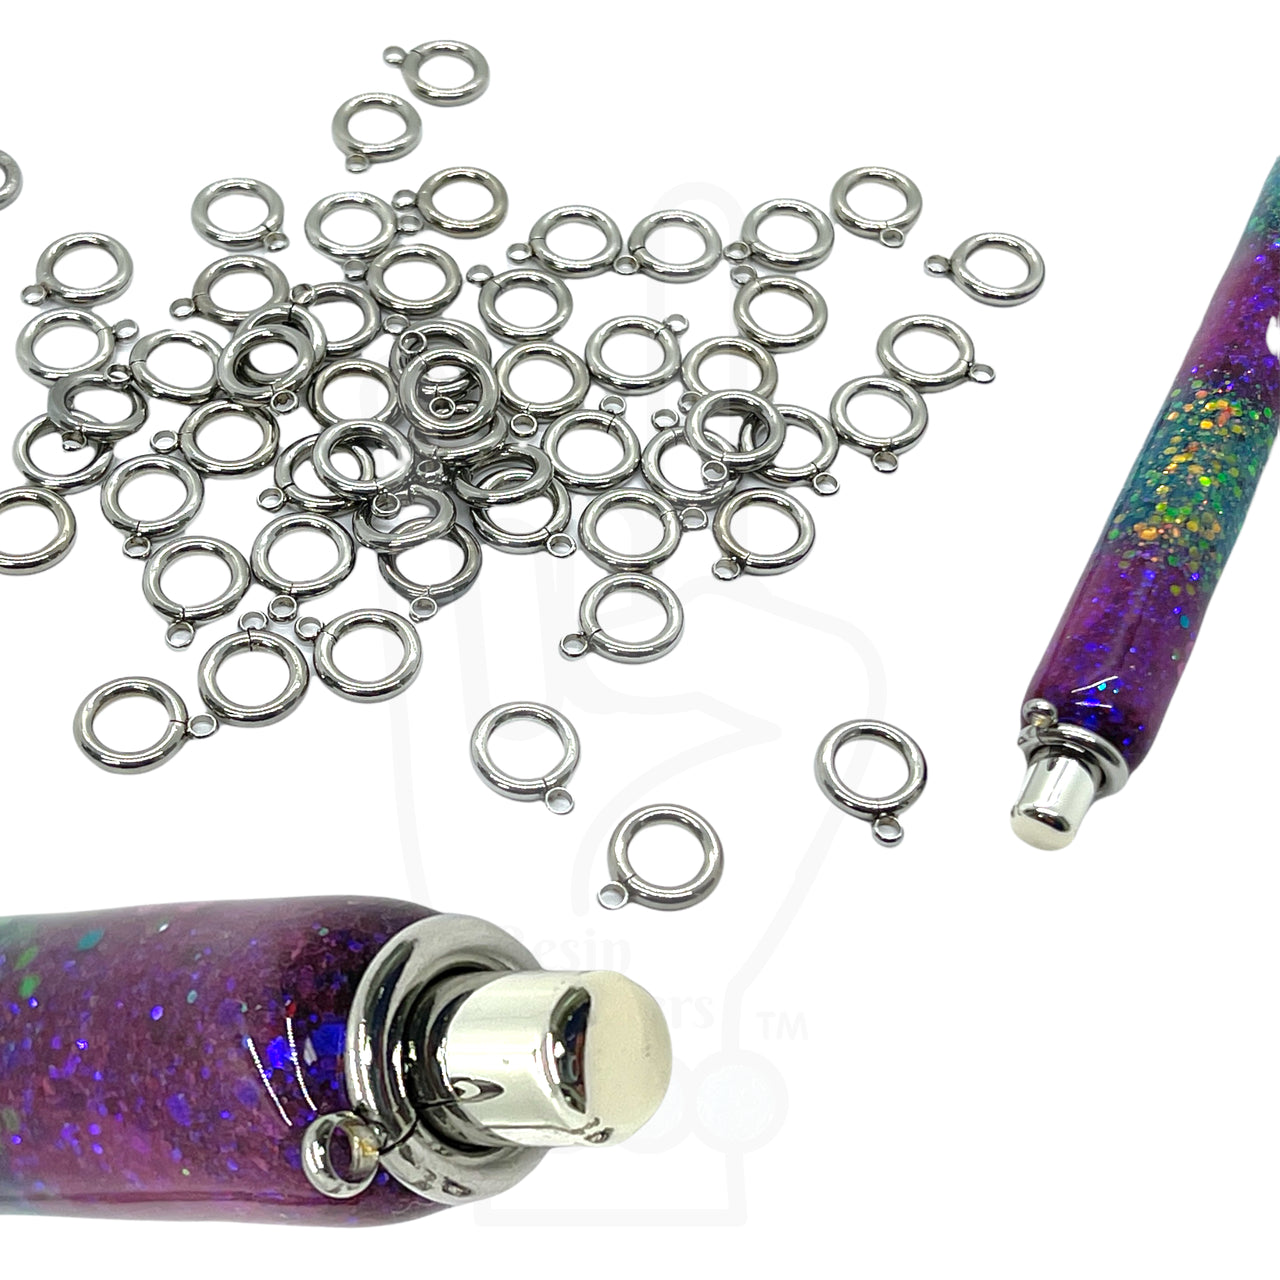 Sharpie S Gel ONLY Frustration Free Pen Charm Attachment Rings Plated Stainless Steel 25 Pack